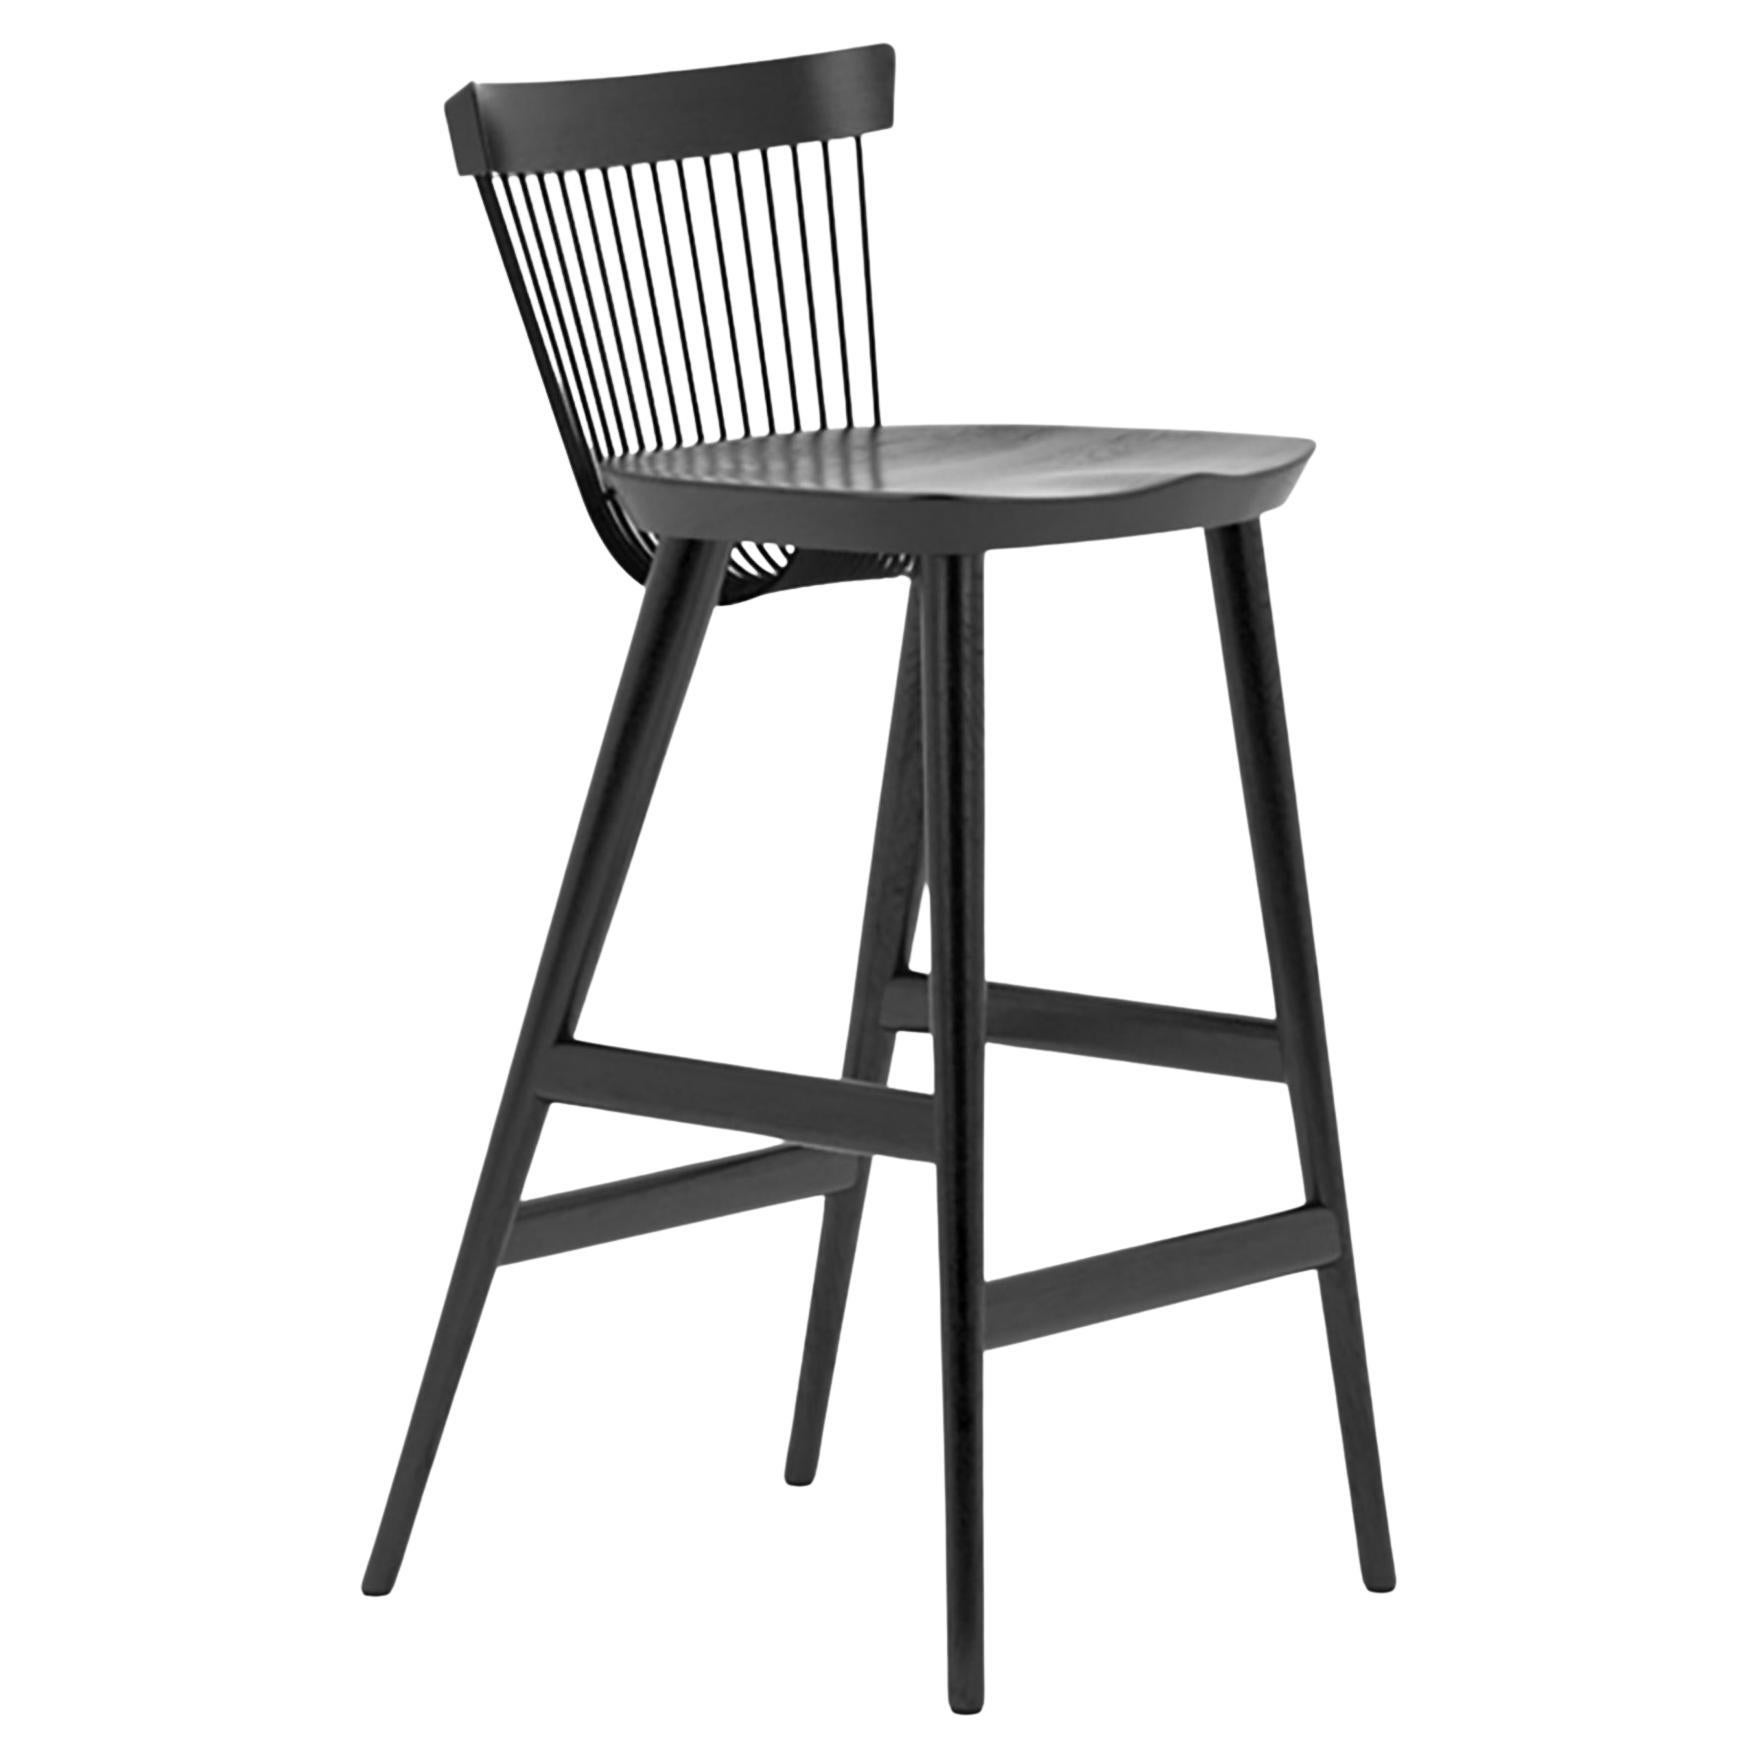 Hayche WW Bar Stool - Black, UK, Made To Order For Sale